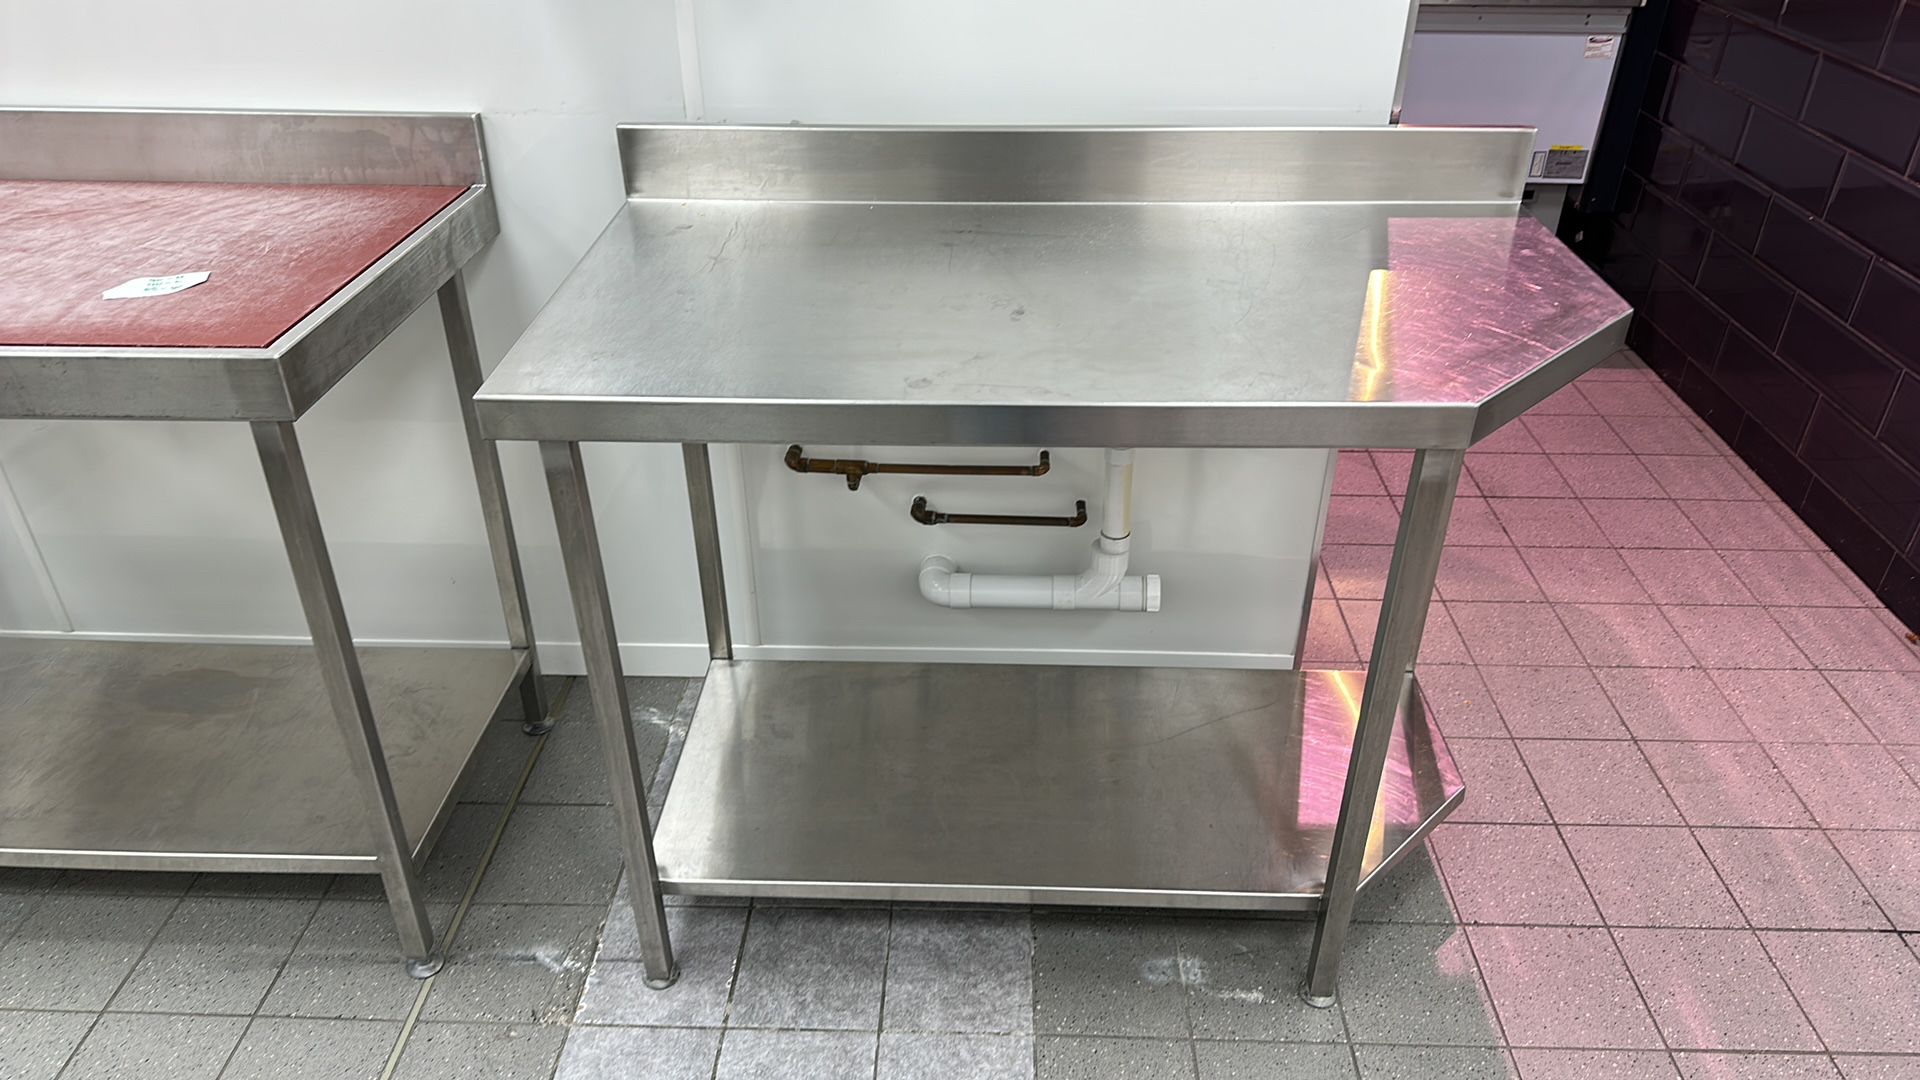 Stainless Steel Counter Worktop - Image 2 of 3